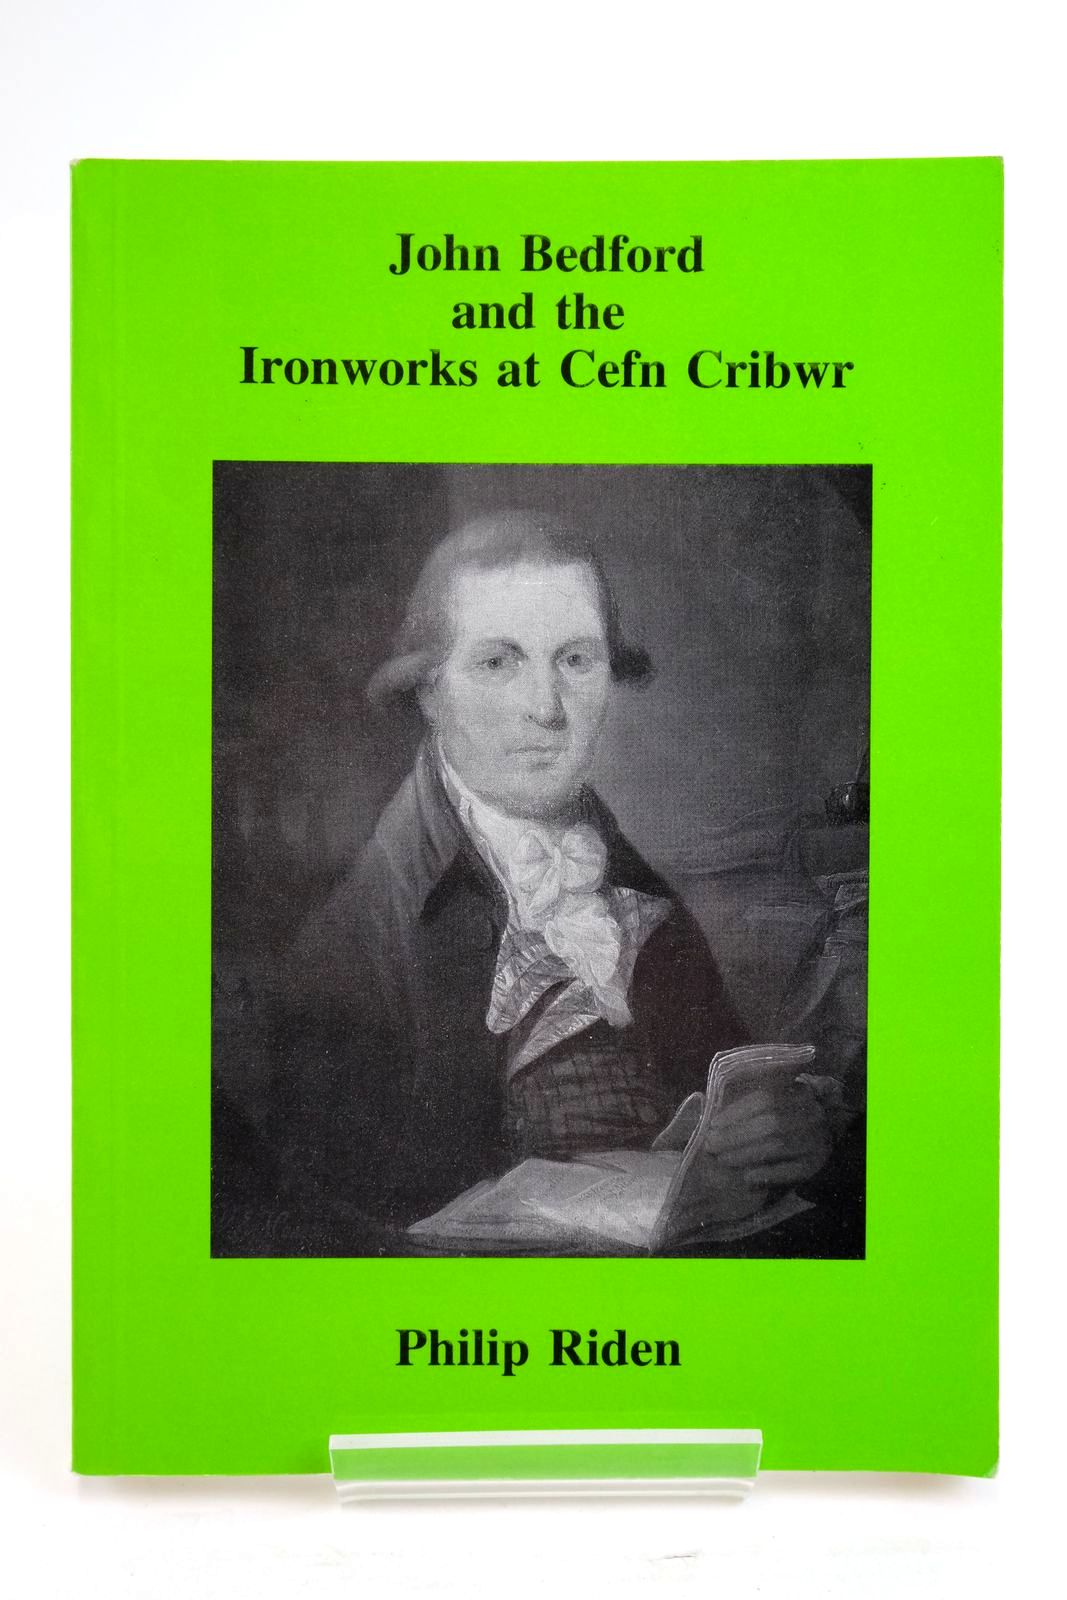 Photo of JOHN BEDFORD AND THE IRONWORKS AT CEFN CRIBWR written by Riden, Philip published by Philip Riden (STOCK CODE: 2136076)  for sale by Stella & Rose's Books